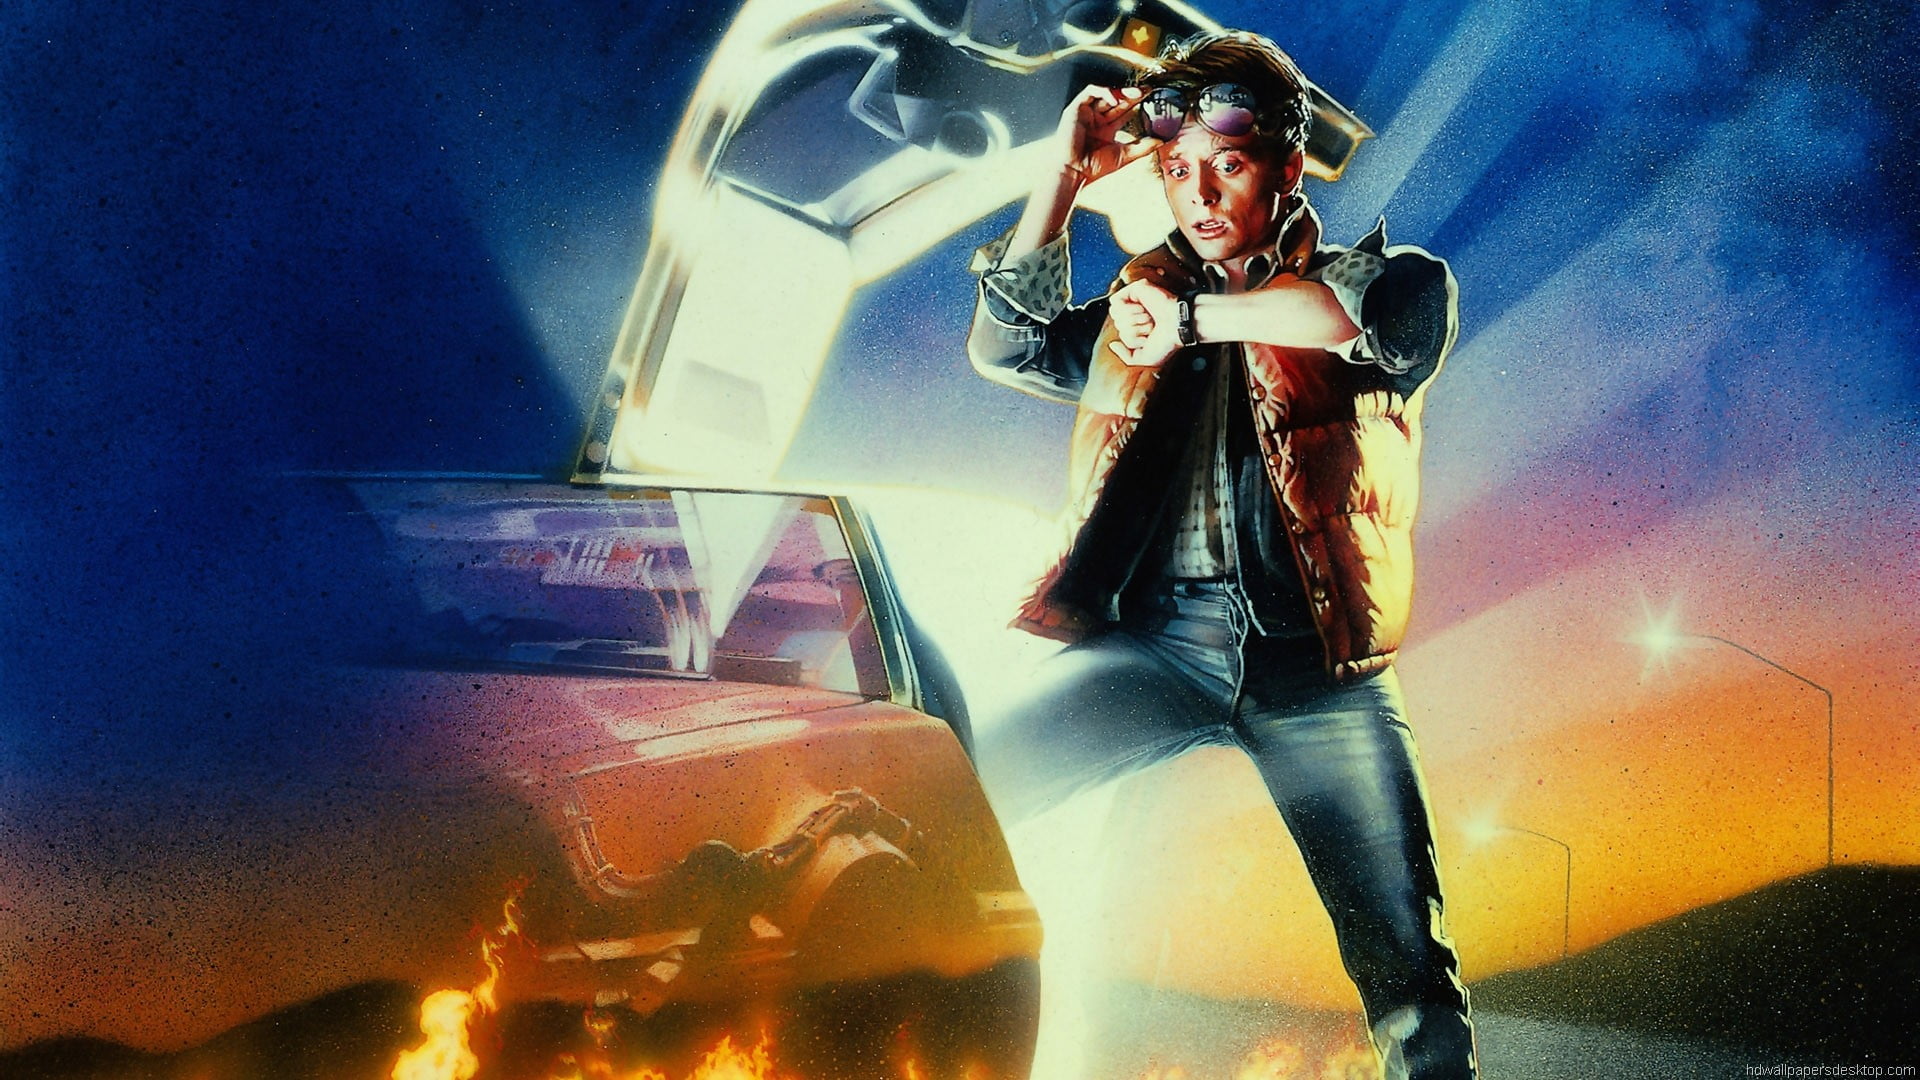 Back To The Future movie poster, science fiction, DeLorean, movies